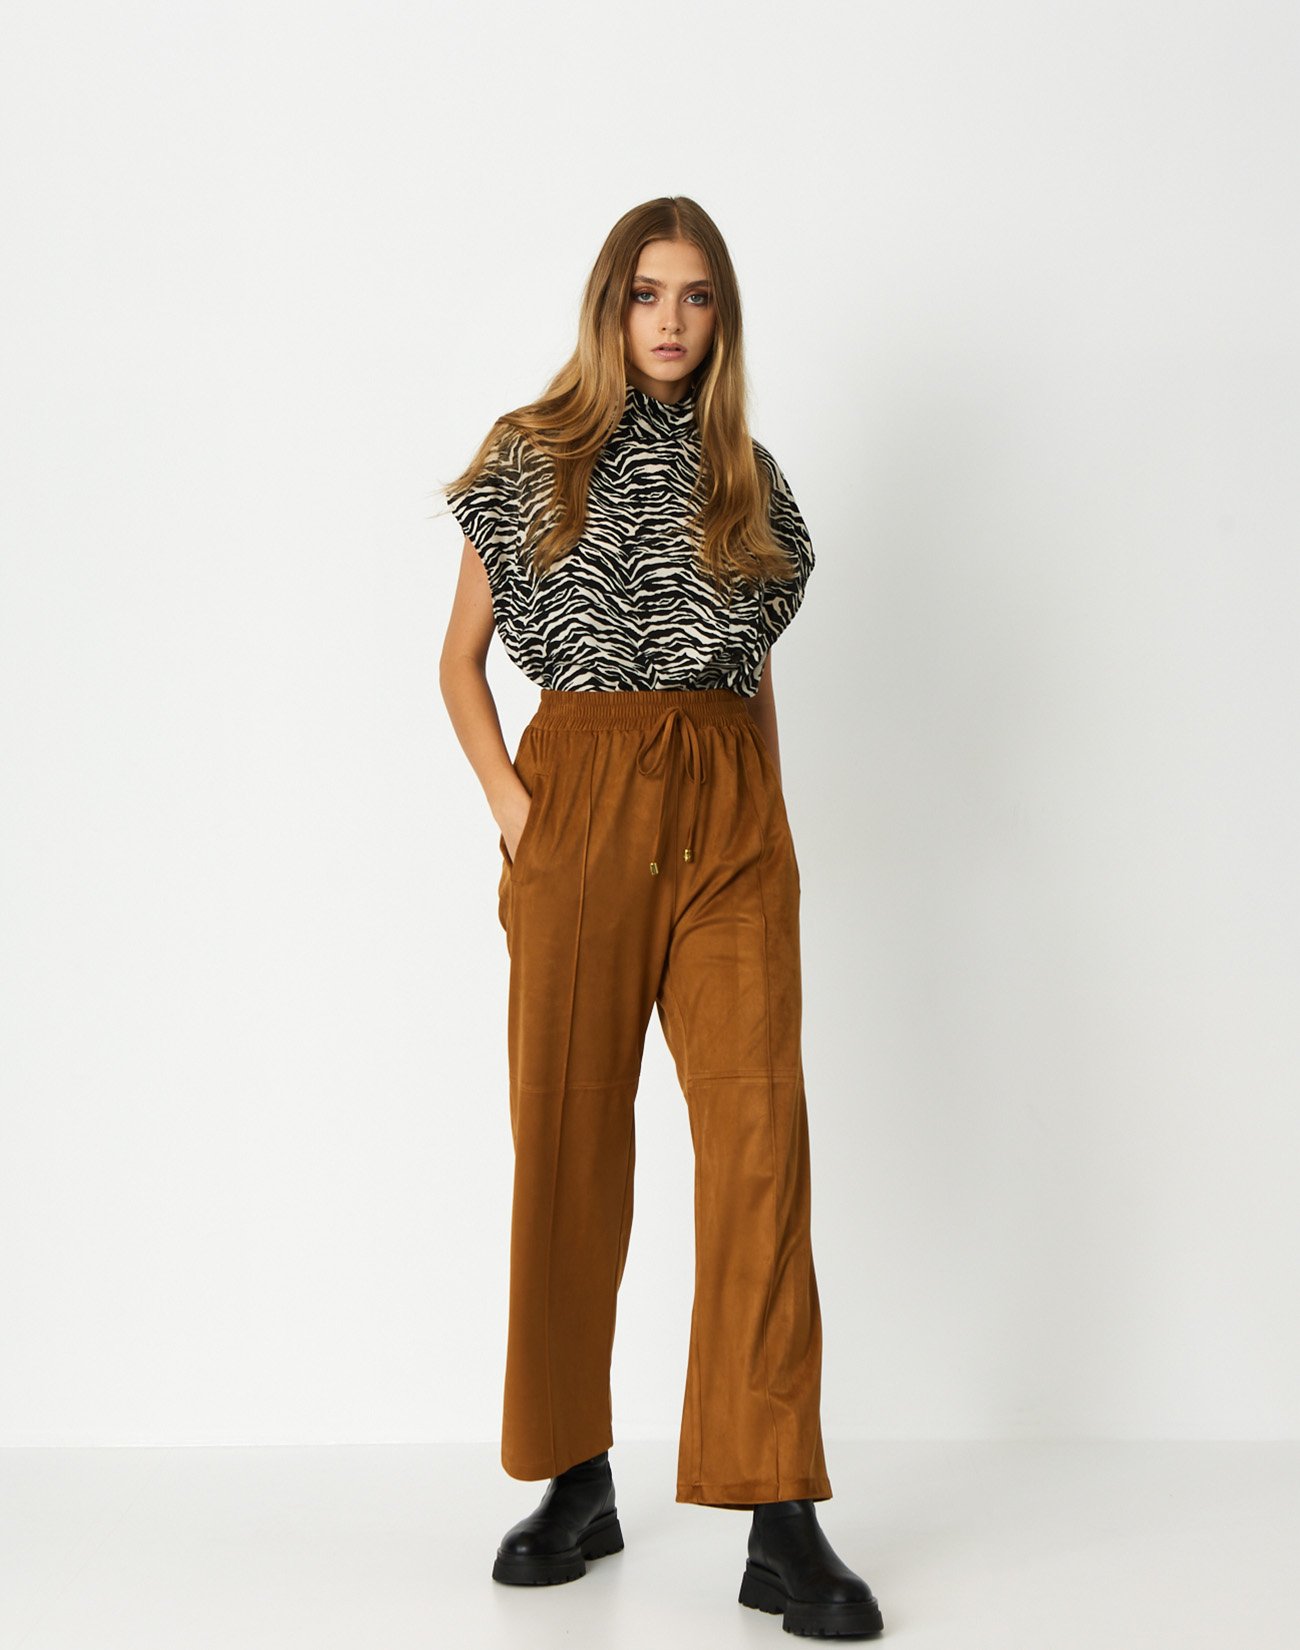 Trousers wih suede effect